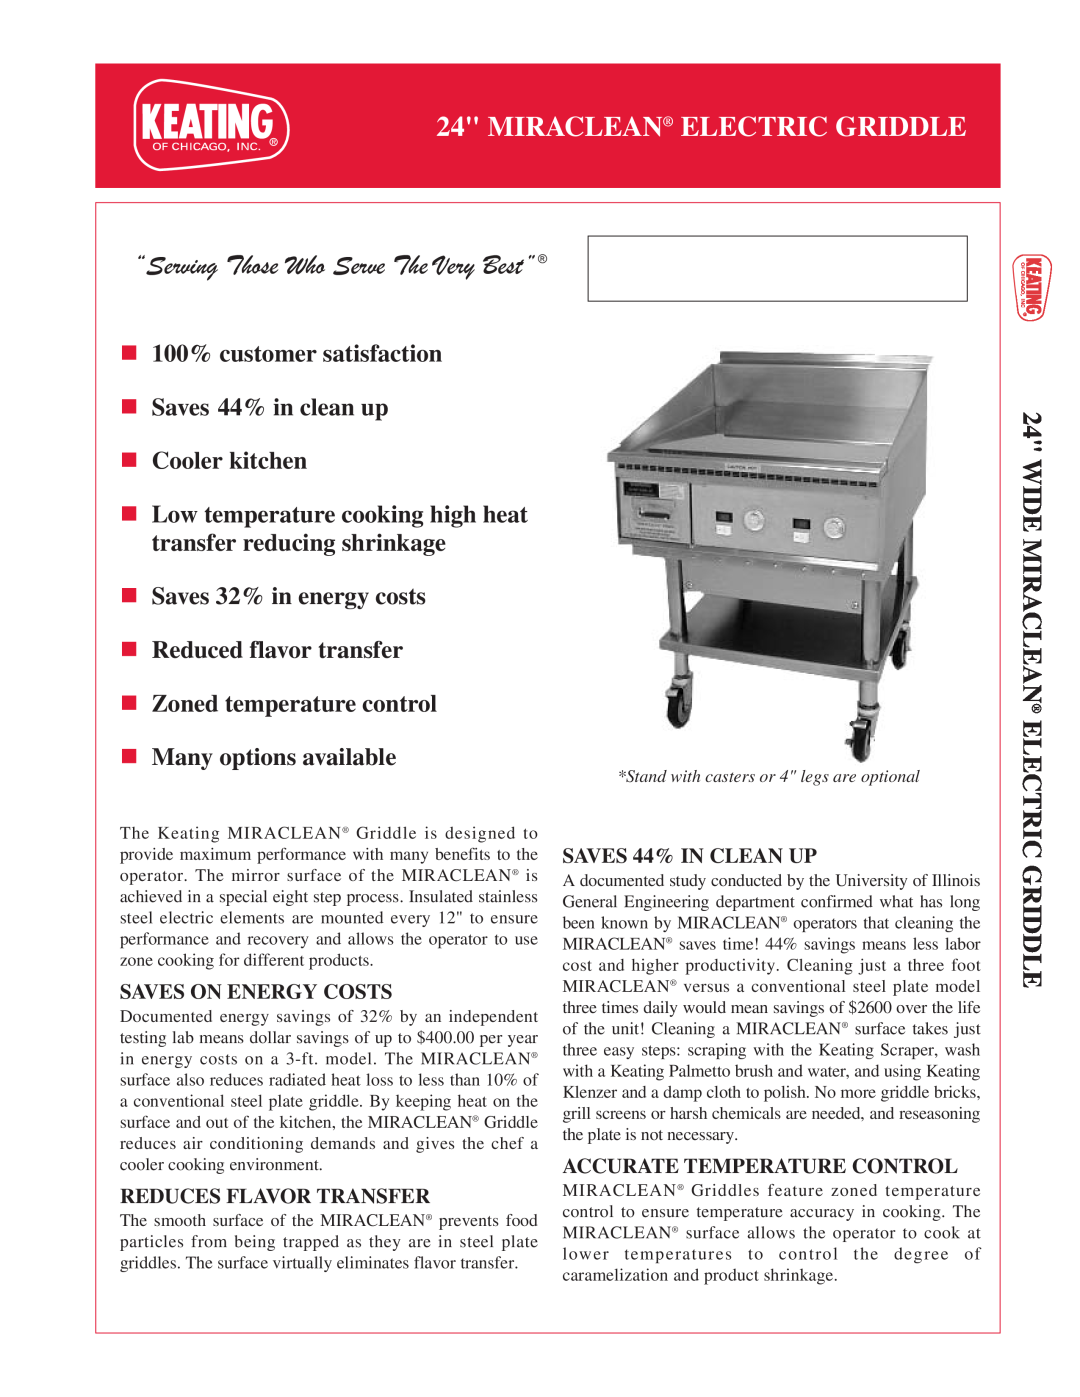 Keating Of Chicago 2430 HI, 2430 FT manual Wide Miraclean Electric Griddle, “Serving Those Who Serve The Very Best” 